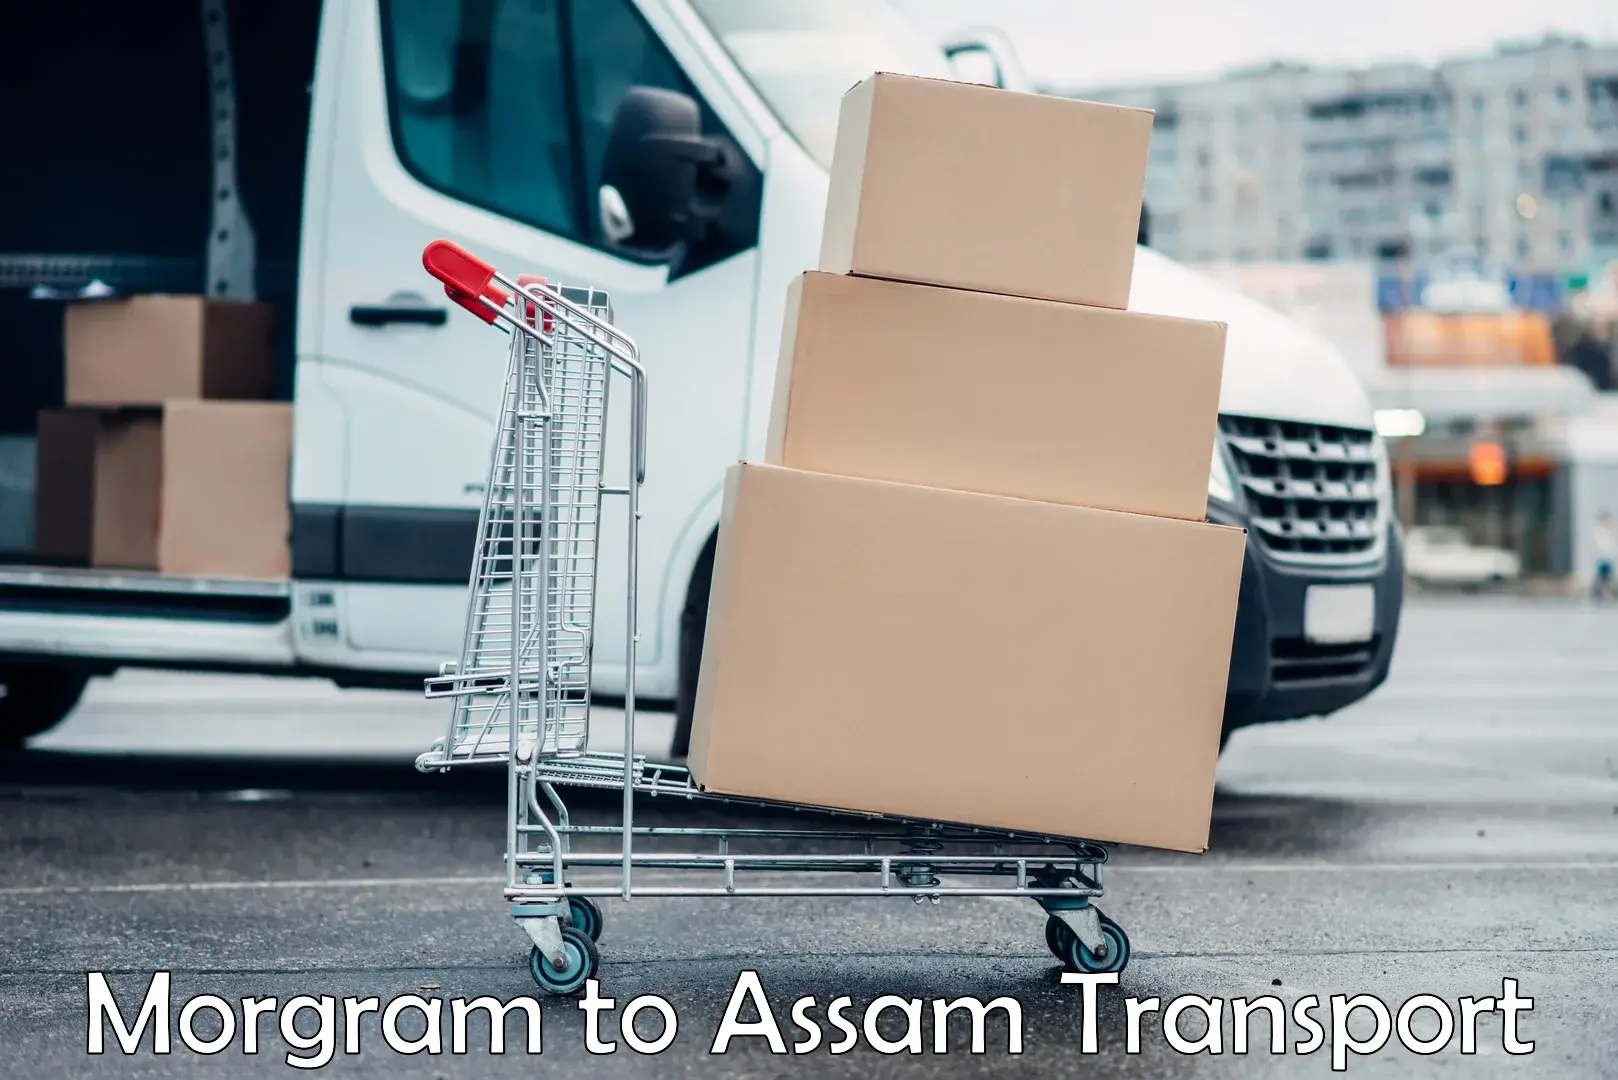 Goods delivery service Morgram to Assam